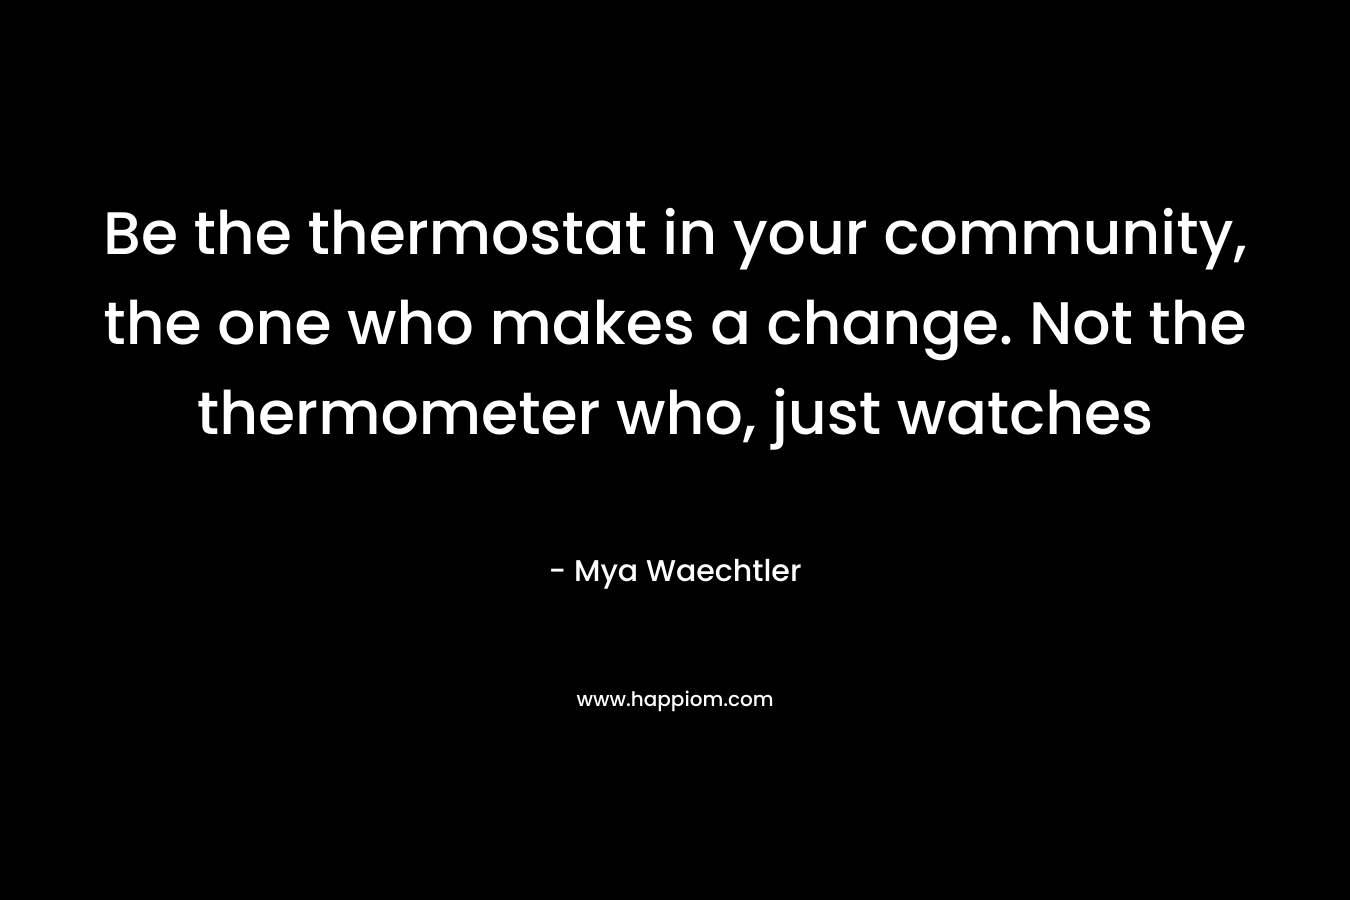 Be the thermostat in your community, the one who makes a change. Not the thermometer who, just watches – Mya Waechtler